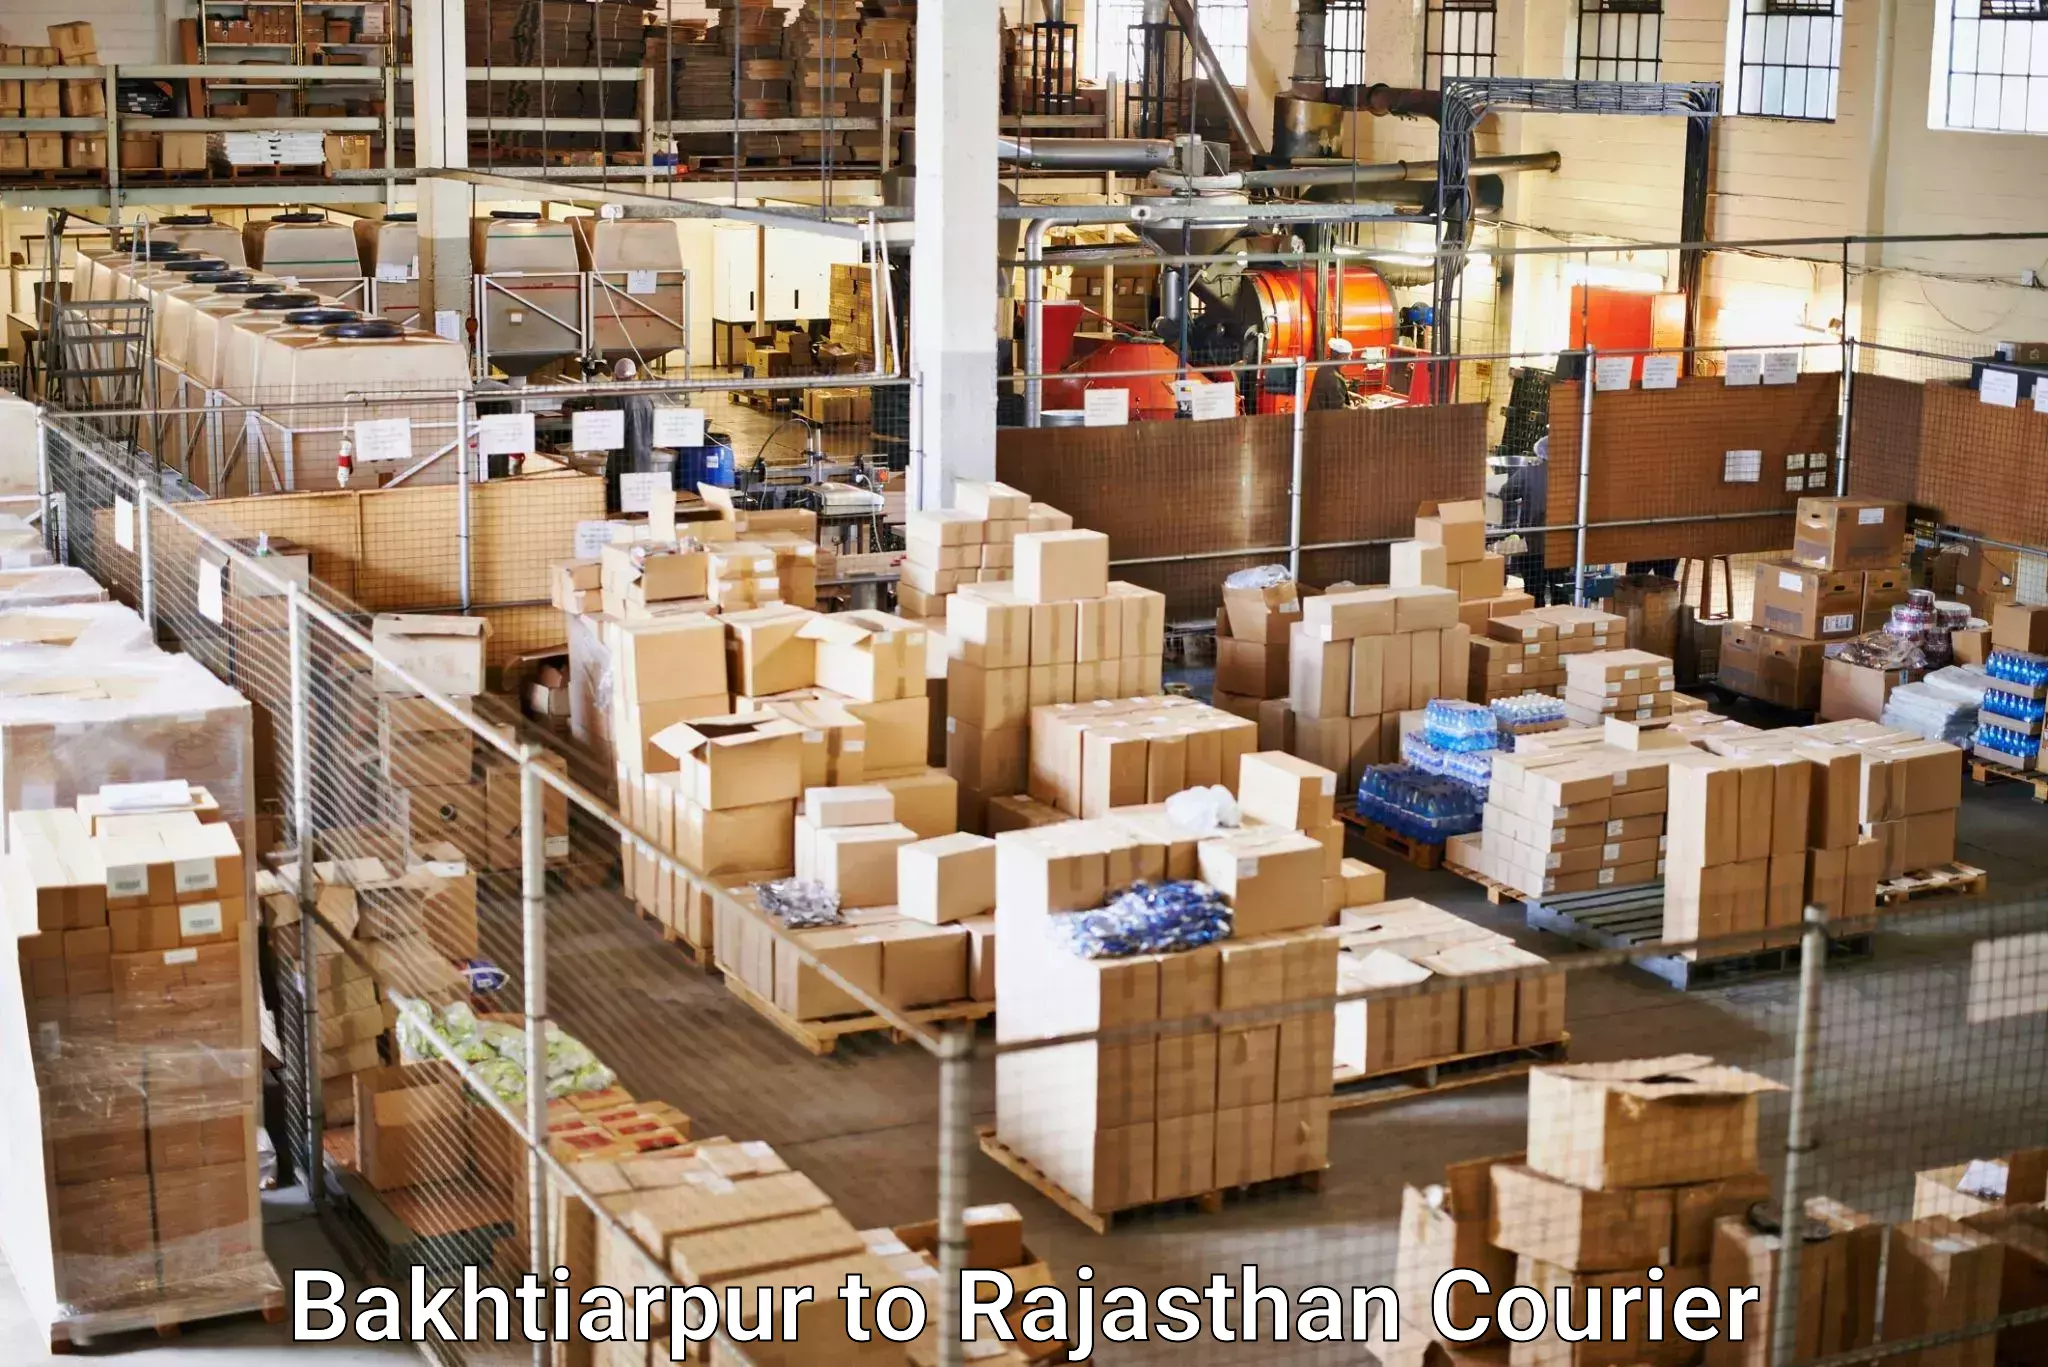 Same-day delivery solutions Bakhtiarpur to Rajasthan